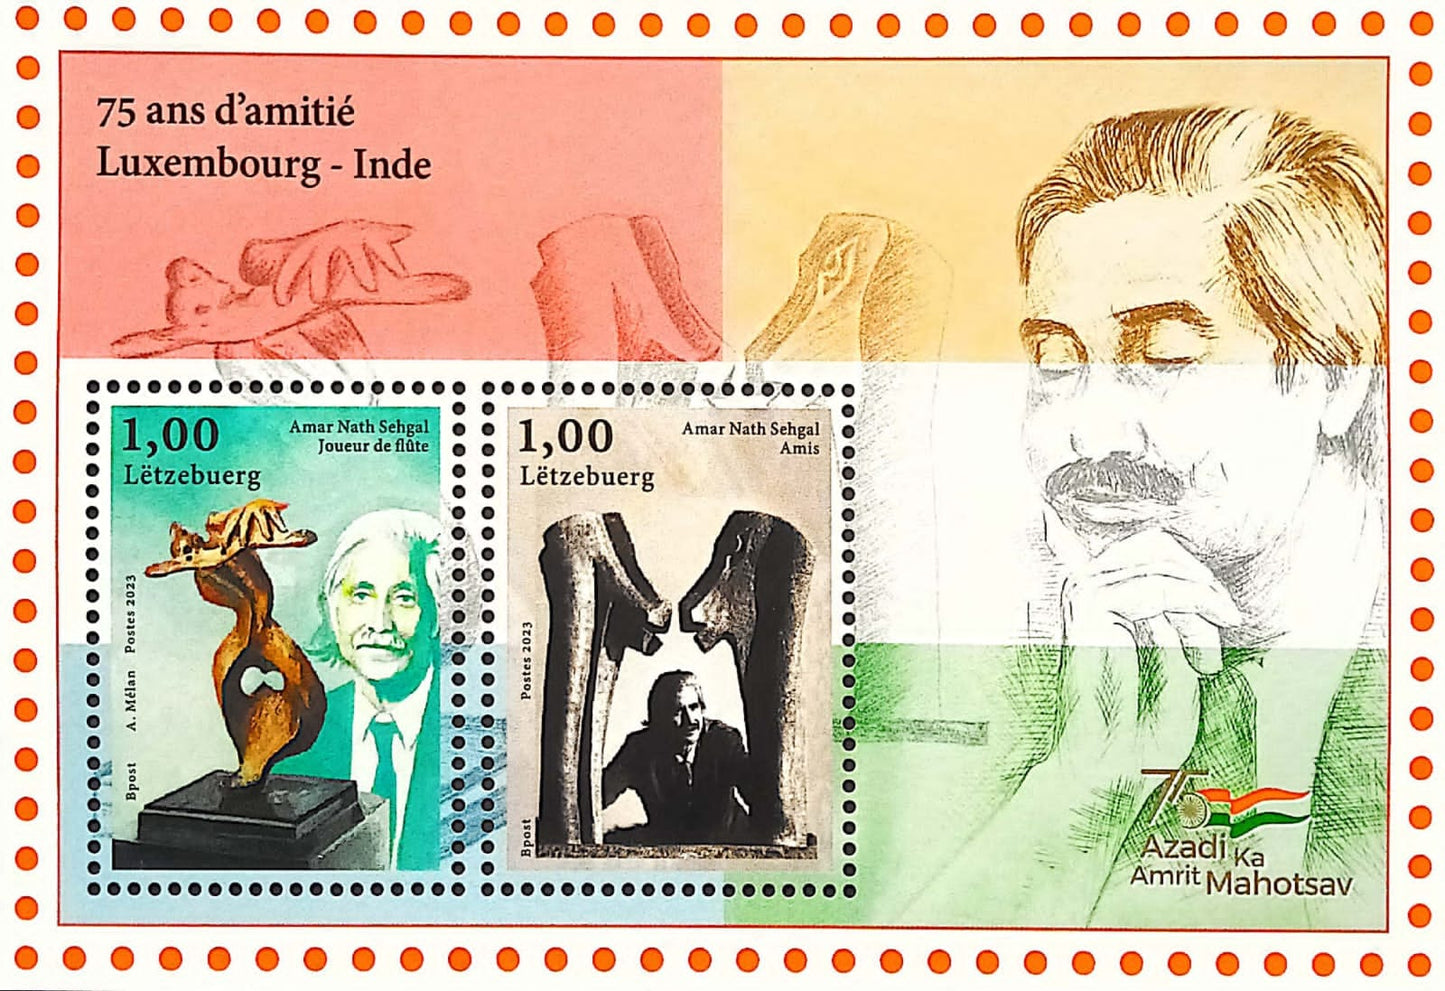 2023 Luxembourg - 75 years of friendship between Luxembourg and India, with artist Amar Nath Sehgal as subject -